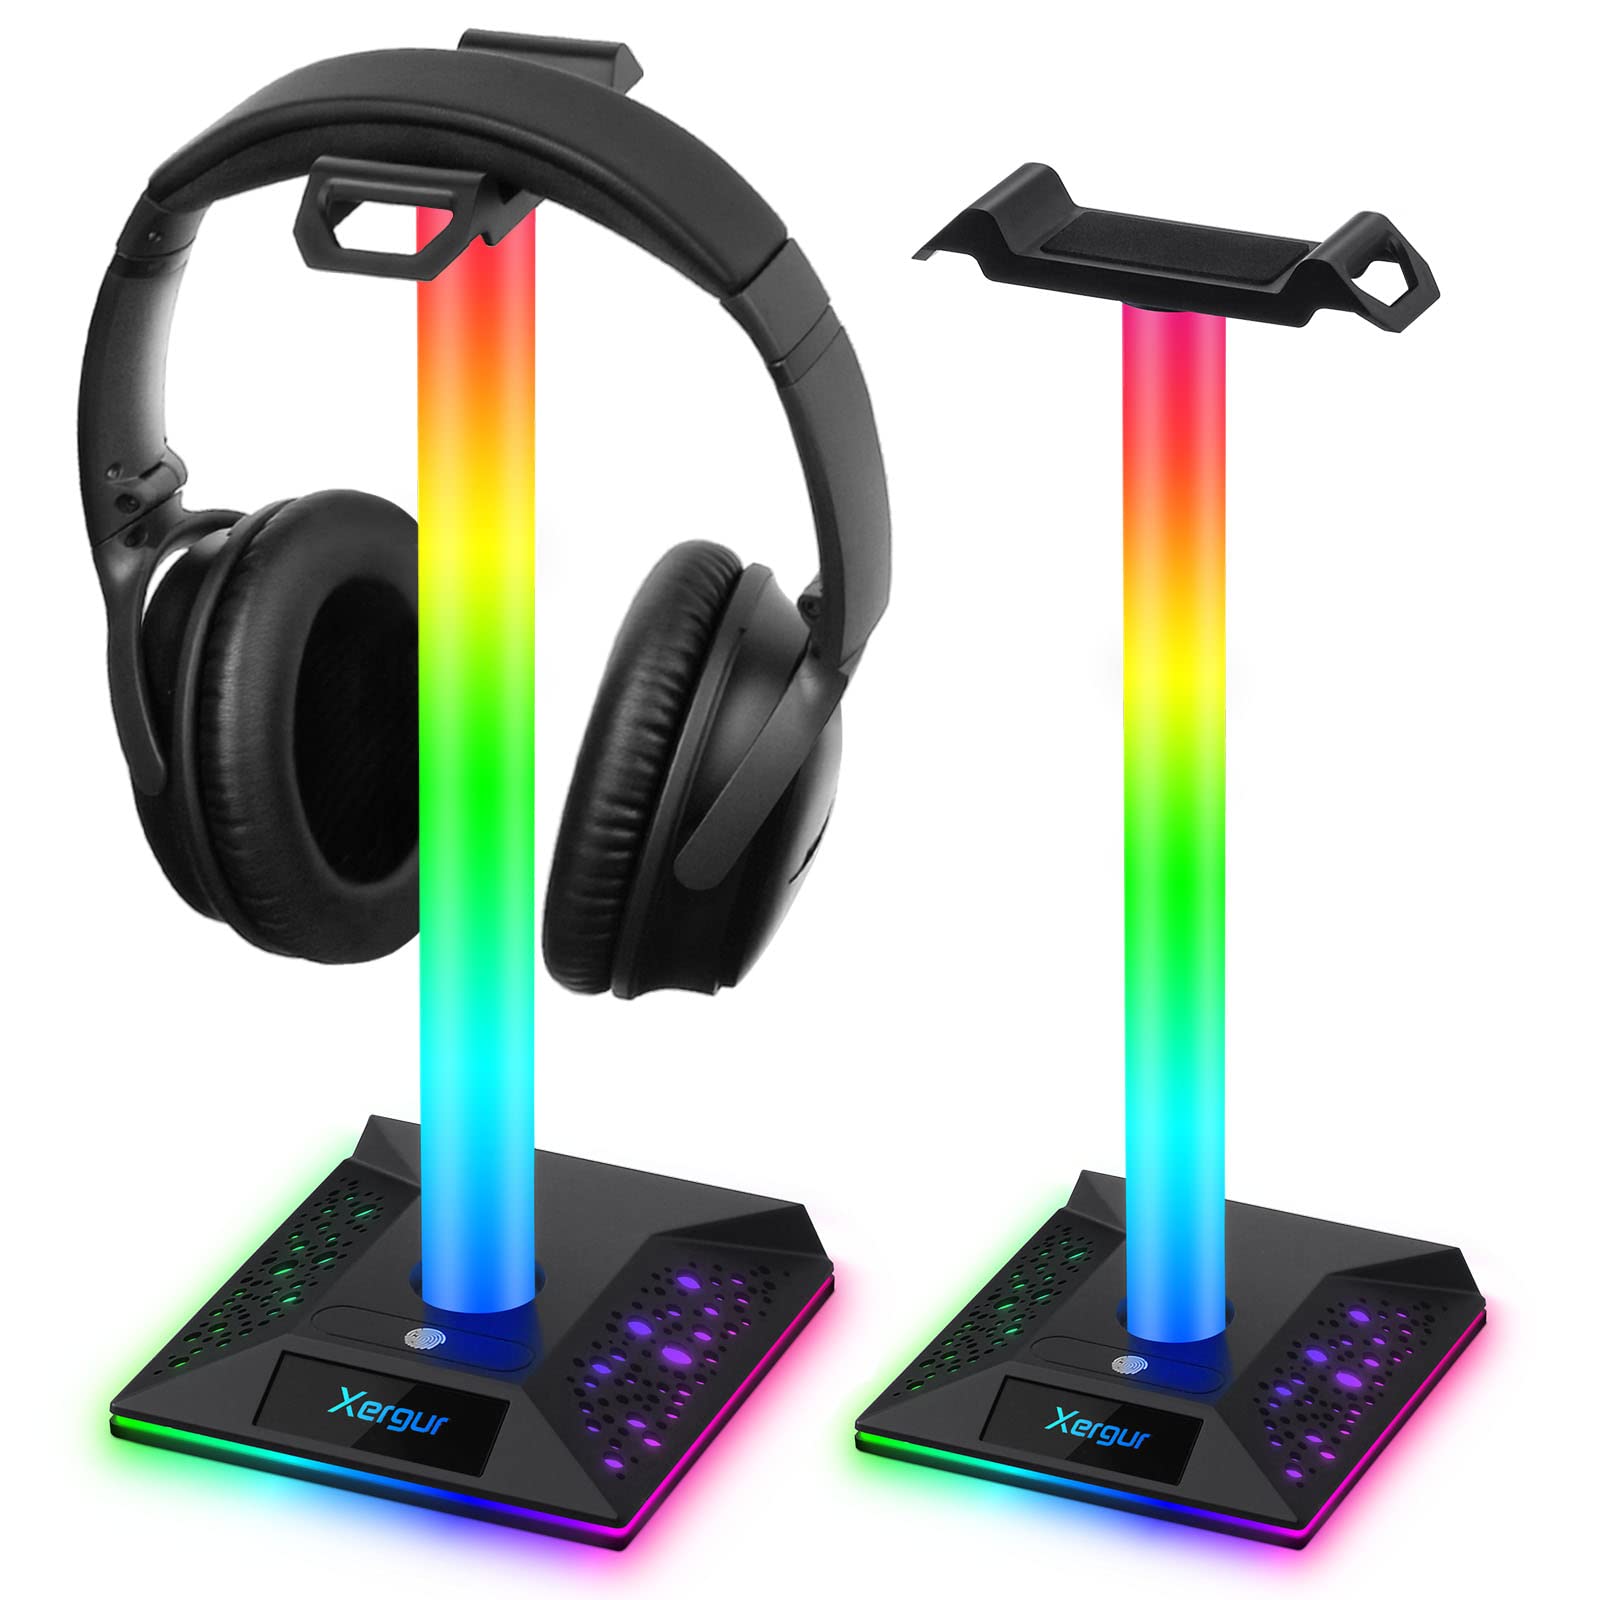 Xergur Gaming Headphone Stand PC Accessories, RGB Headset Stand with 2 USB Charger, Cool LED Headphone Holder PC Gaming Accessories Gift for Boys Men Gamers, Computer Game Hardware for Desk